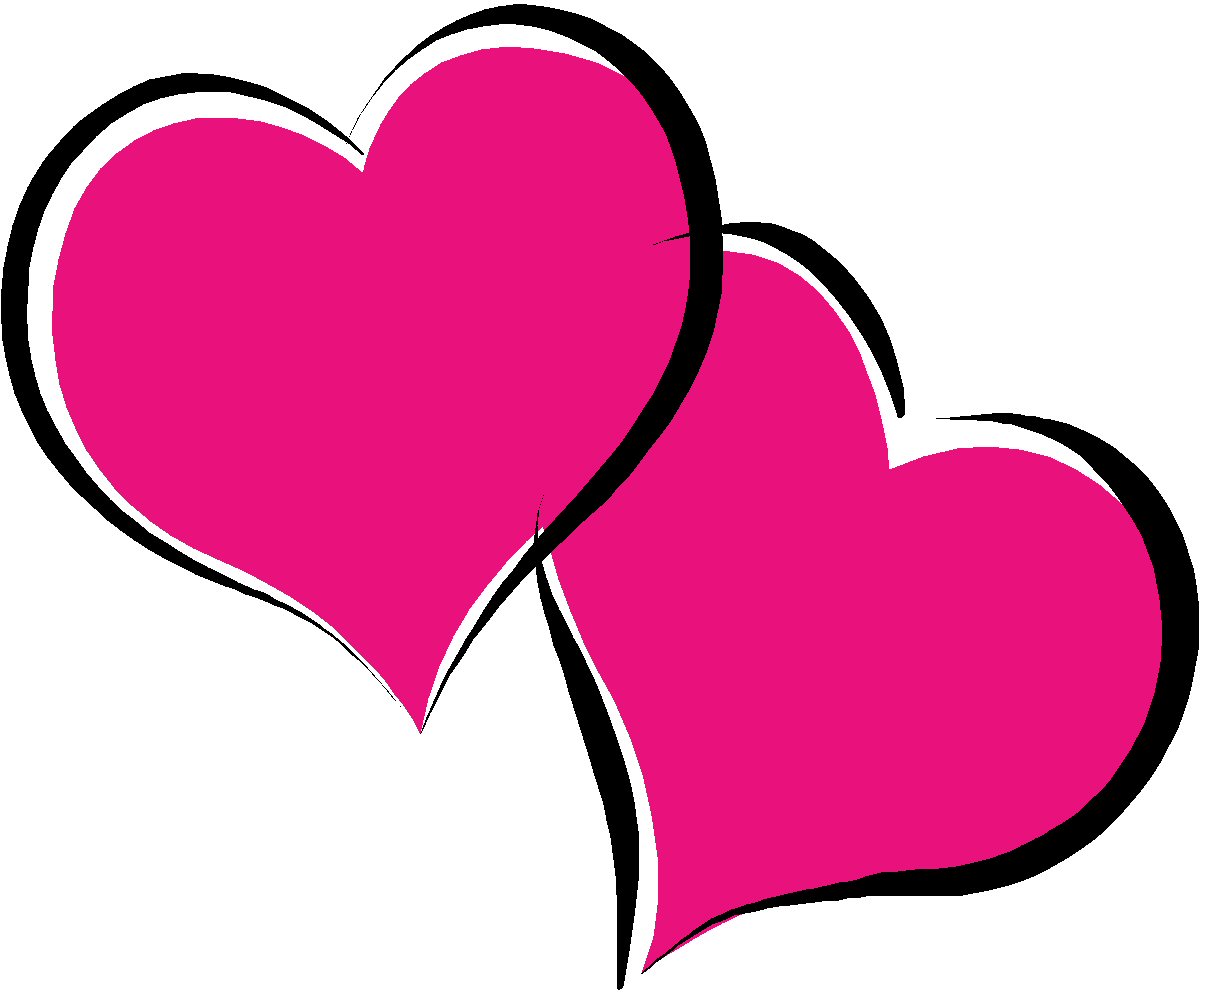 free clipart images hearts - photo #45